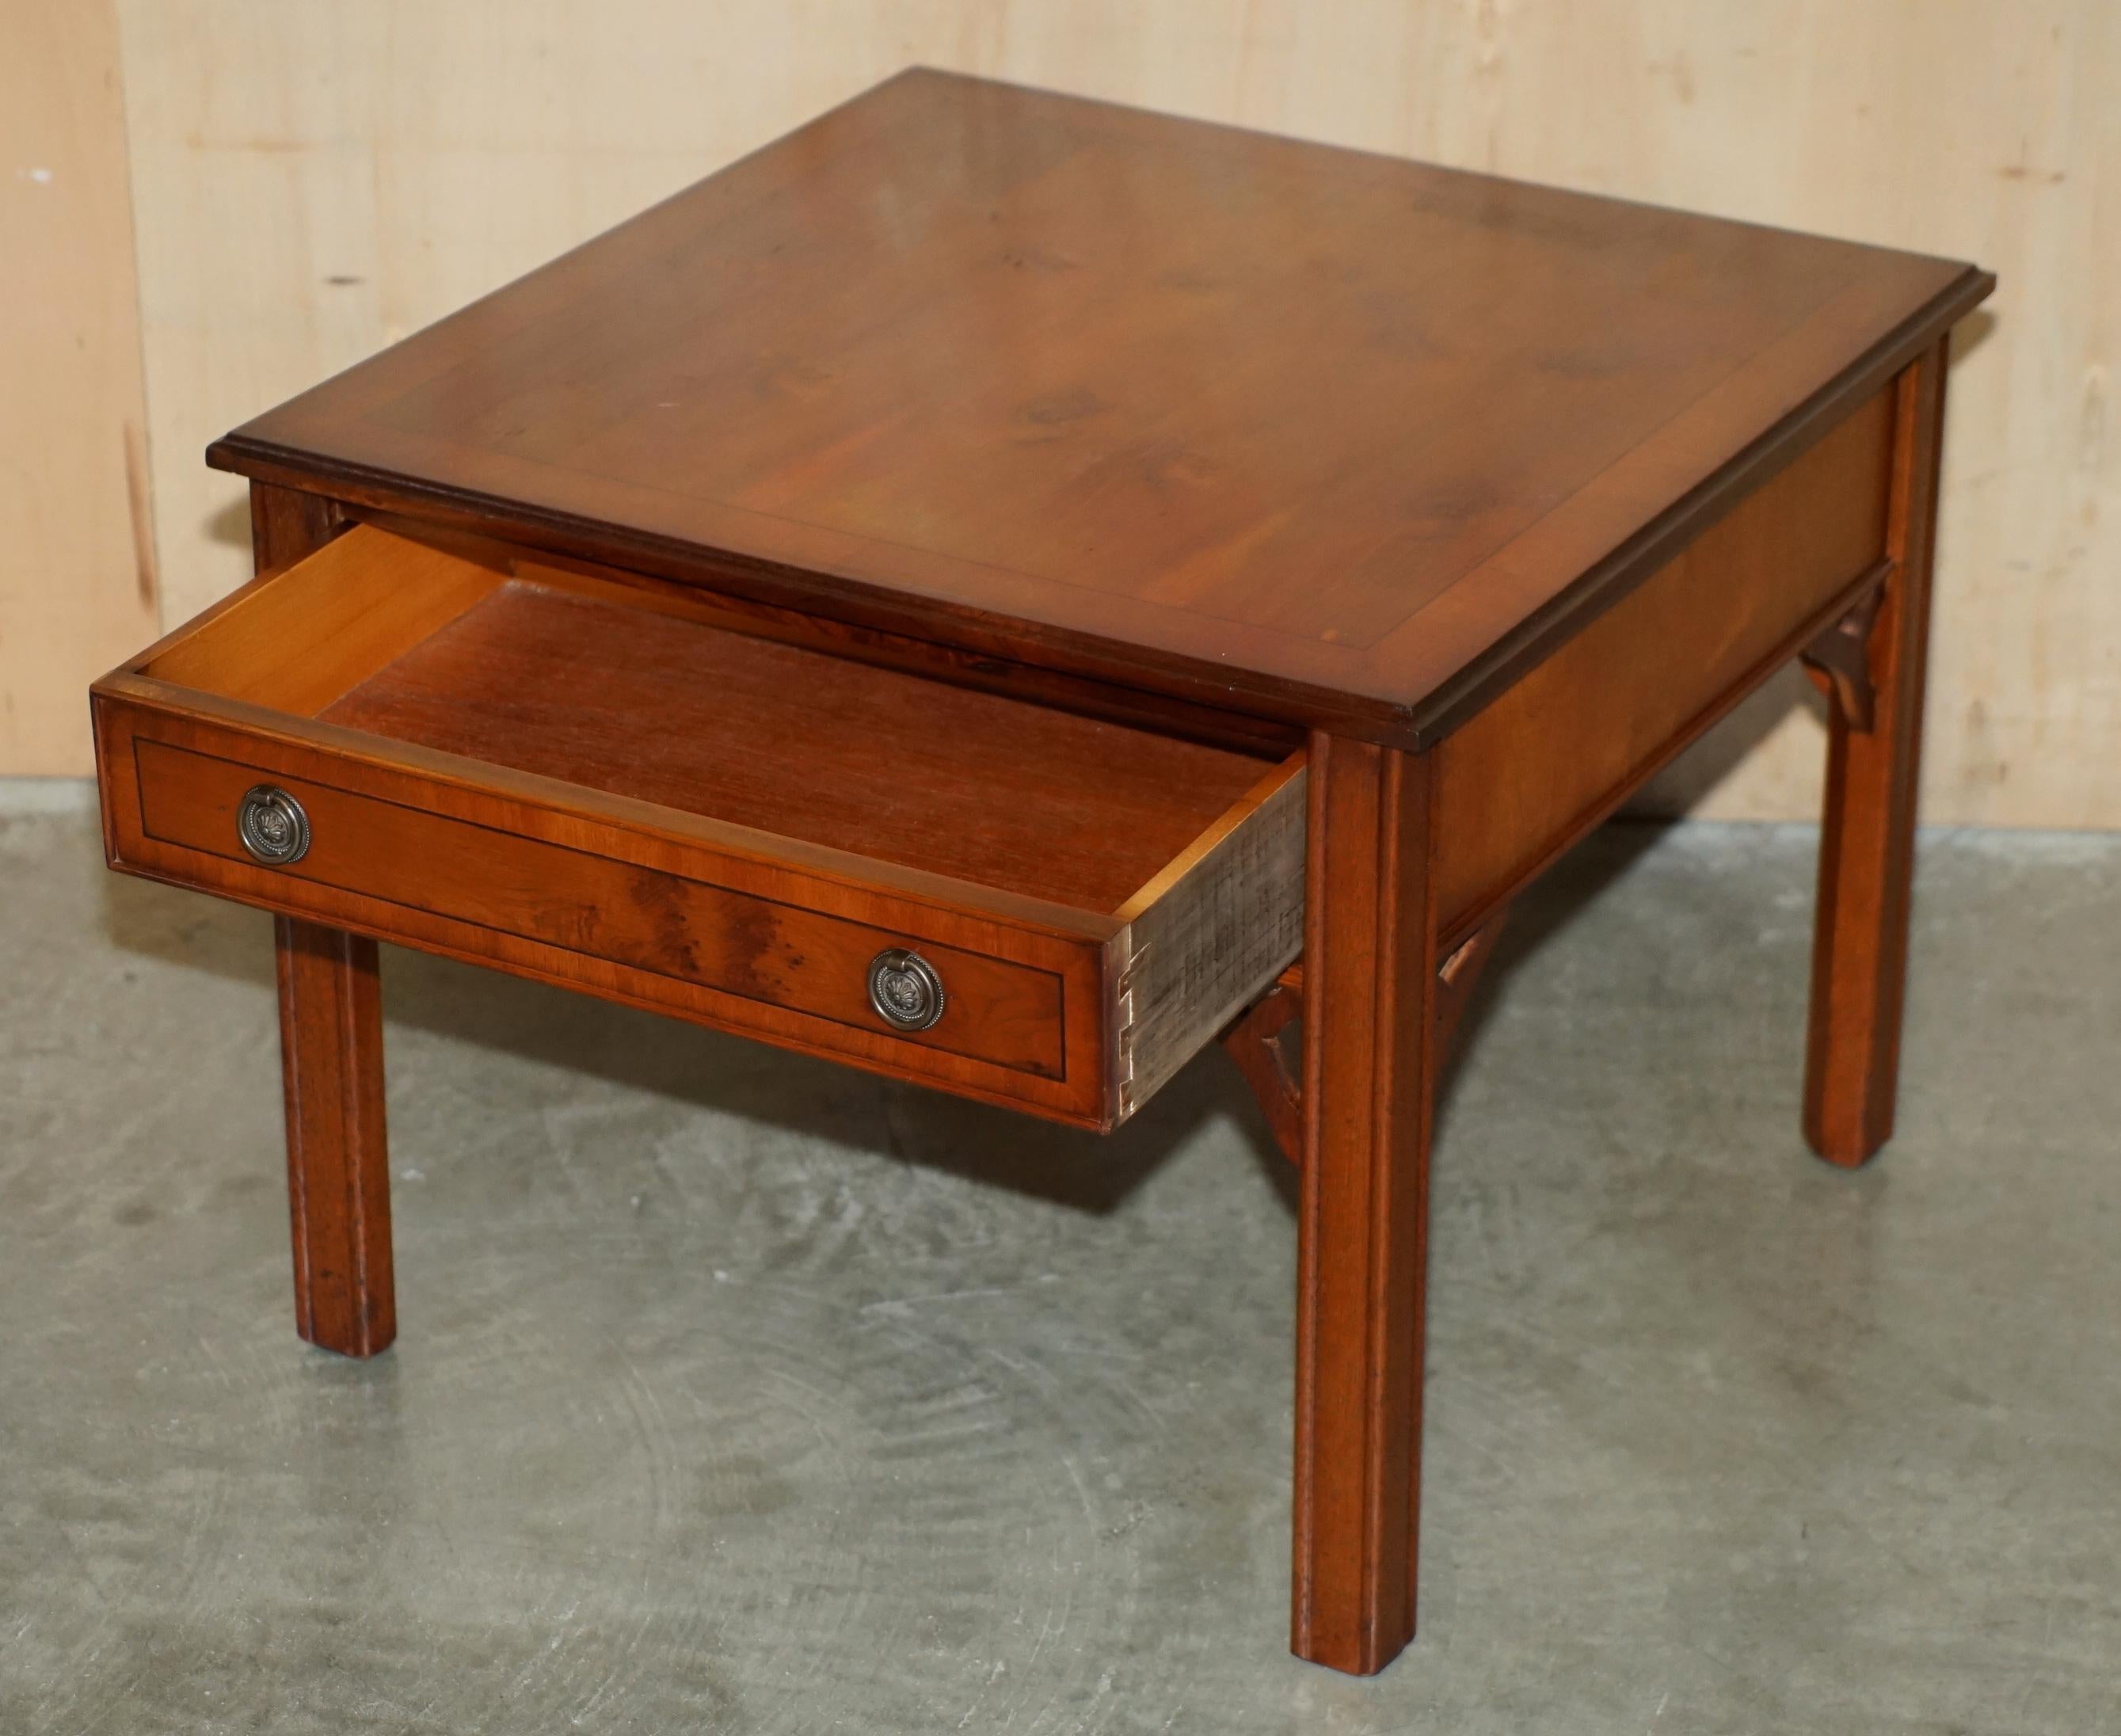 LOVELY PAIR OF BURR YEW WOOD SiDE END LAMP WINE TABLES WITH LARGE SINGLE DRAWERS For Sale 13